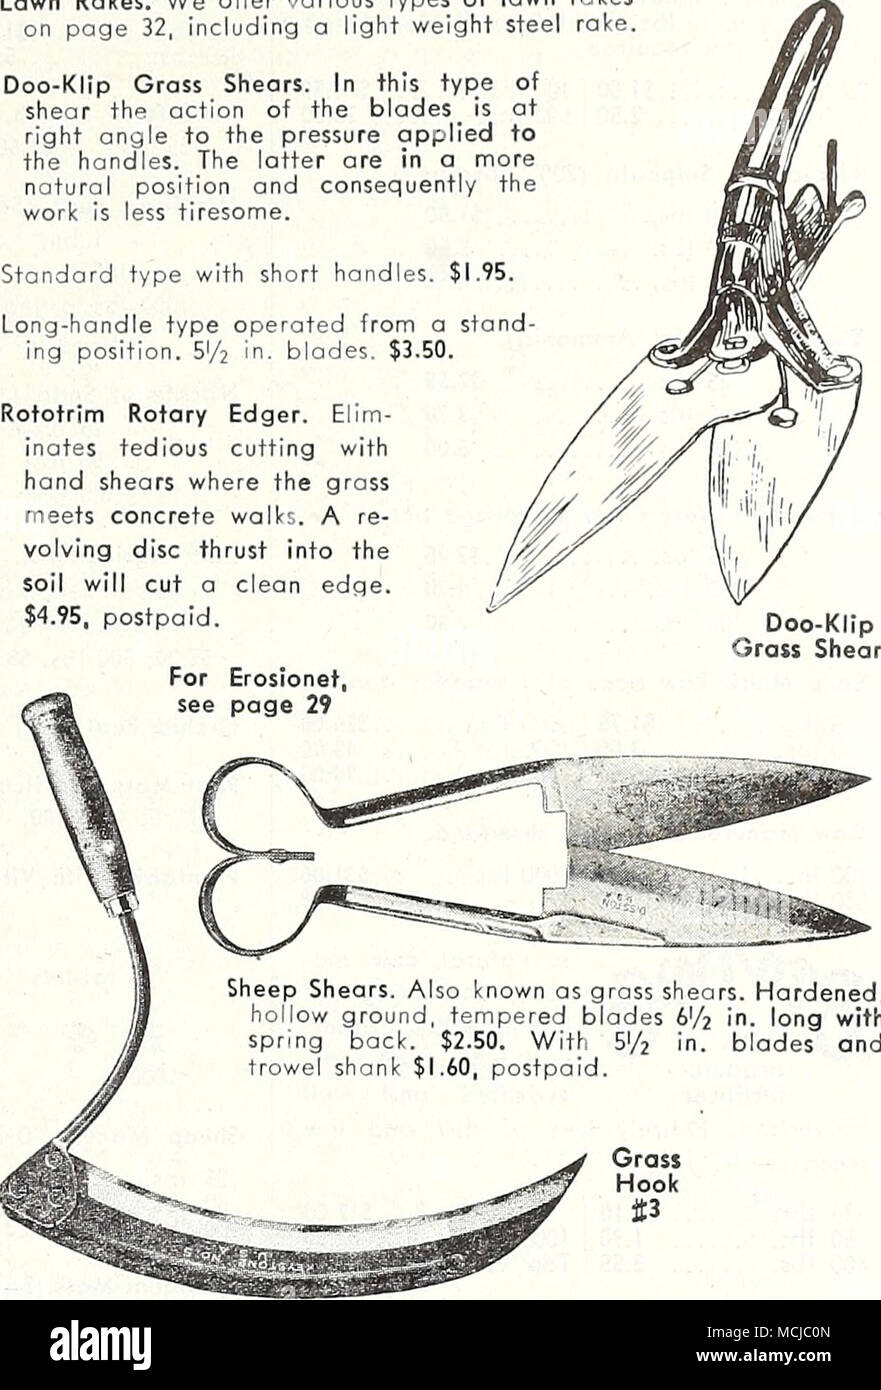 . Sheep Shears. Also known as grass shears. Hardened, hollow ground, tempered blades 6'/2 in. long with spring back. $2.50. With 9/2 in. blades and trowel shank $1.60, postpaid. Grass Hook ft3 Grass Hooks J3. Has full-tempered high-quality steel blade V/i in. wide, off-set at handle. 90c. J5 has detachable tempered steel blade 2 in. wide, 75c. Sickle Bar Lawn Mower Attachments Attached to the front bar of the lawn mower, the cutting blade is put into motion by wooden pulleys resting on the lawn mower driving wheels. Cuts down the high grass so that the mower blades can take hold of the remaind Stock Photo